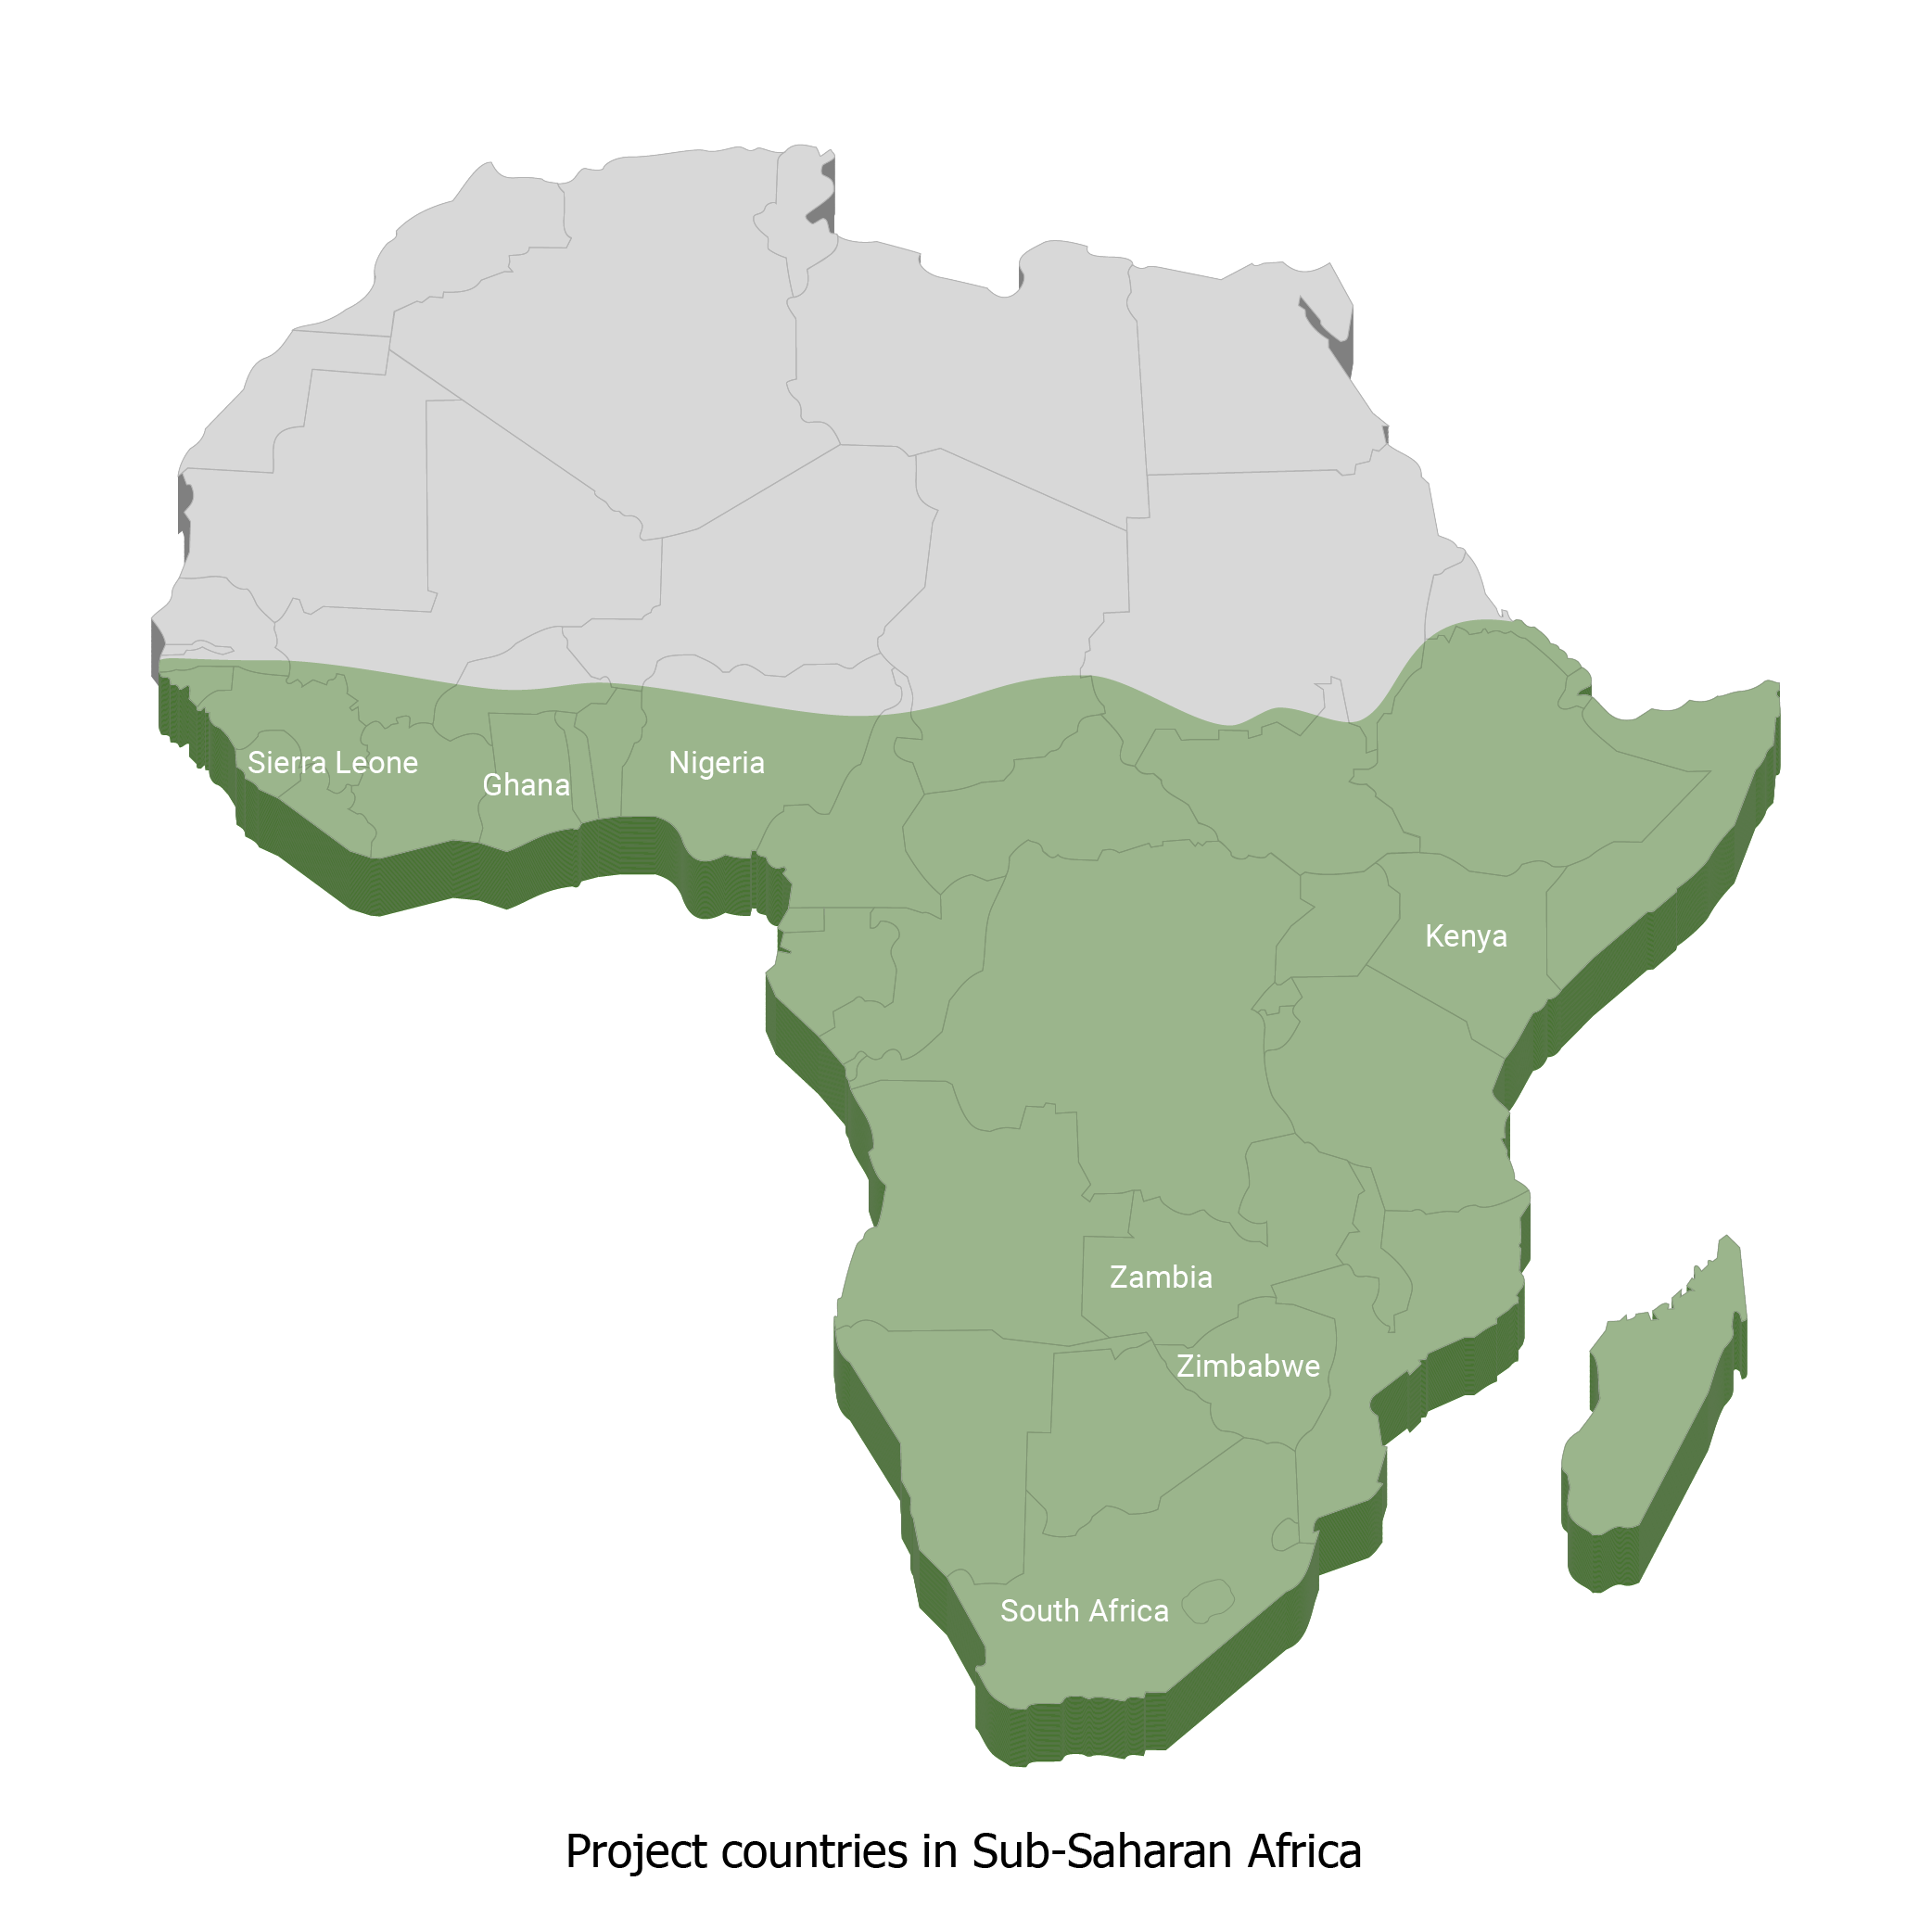 Project countries in Sub-Saharan Africa